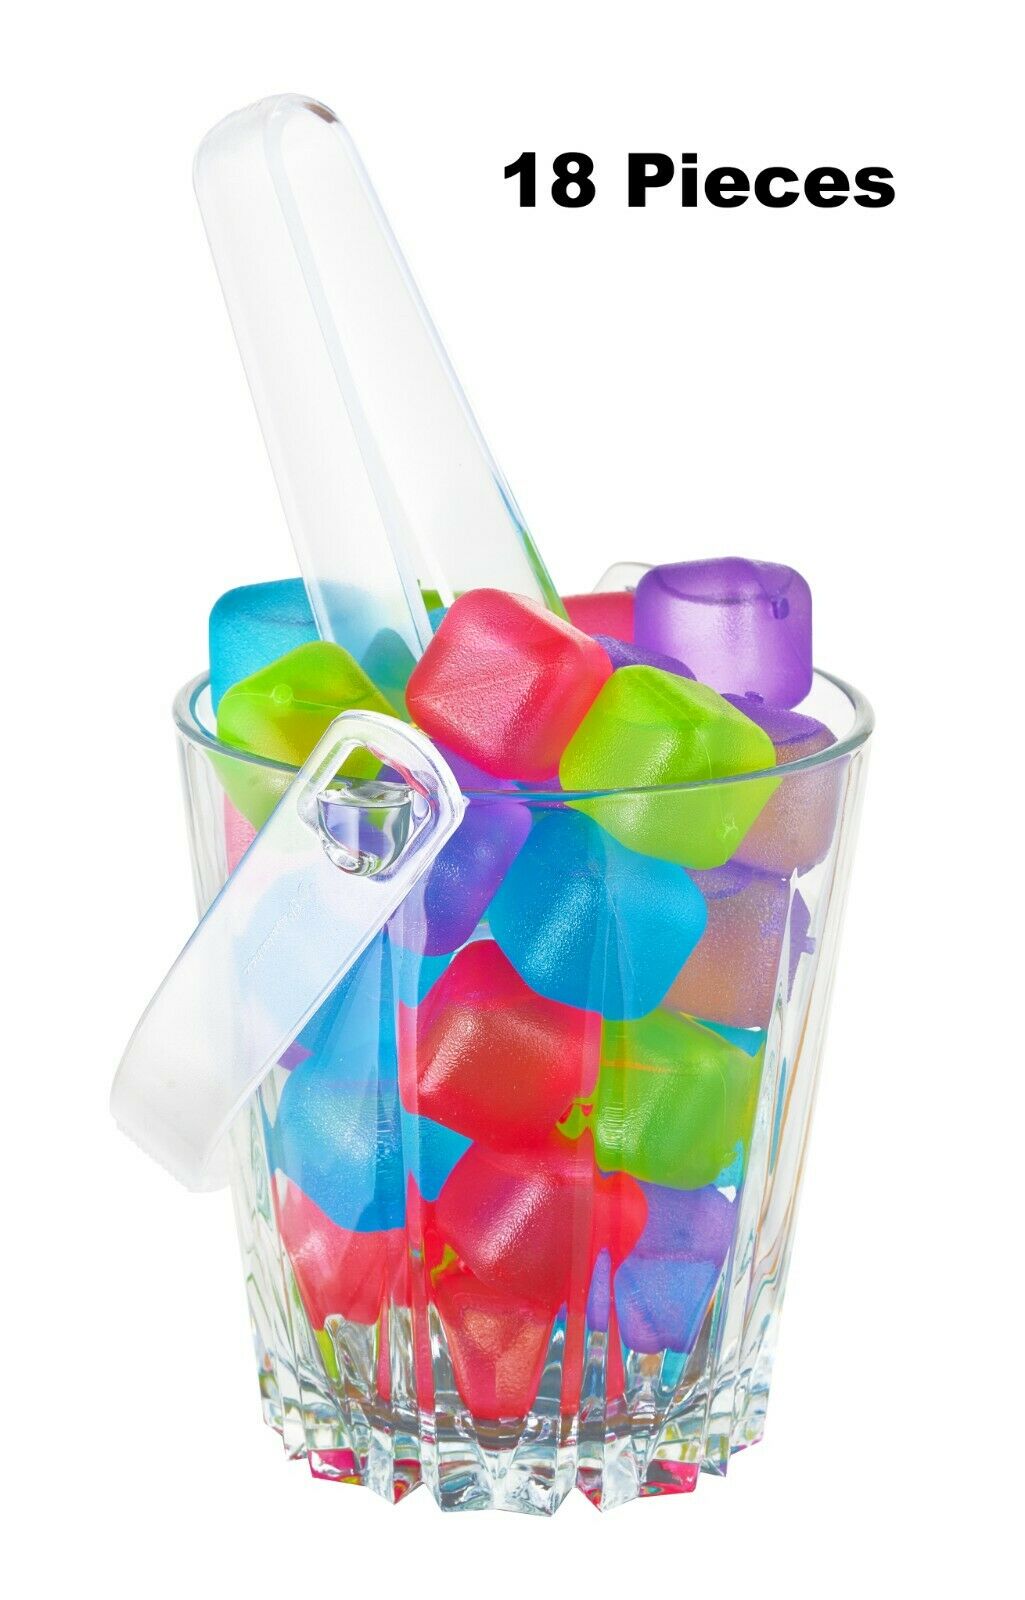 New Reusable Plastic Ice Cubes, Pack Of 18 Colors May Vary, Free Shipping Bpa